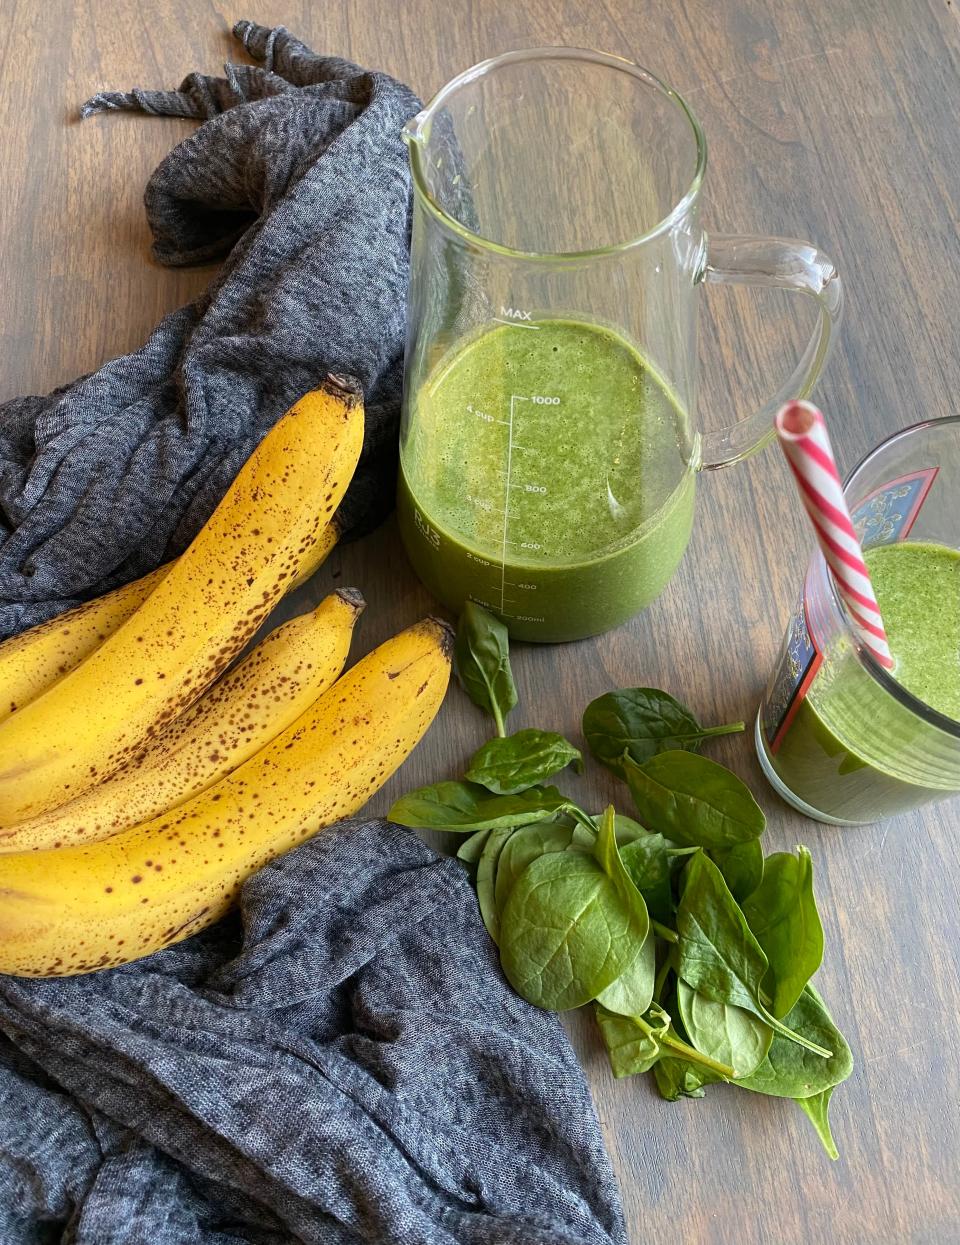 This Super Green Smoothie is loaded with vitamin C, anti-inflammatory properties, and lots of other super-charged nourishment. The flavor is mild, and slightly sweet from the fruit.